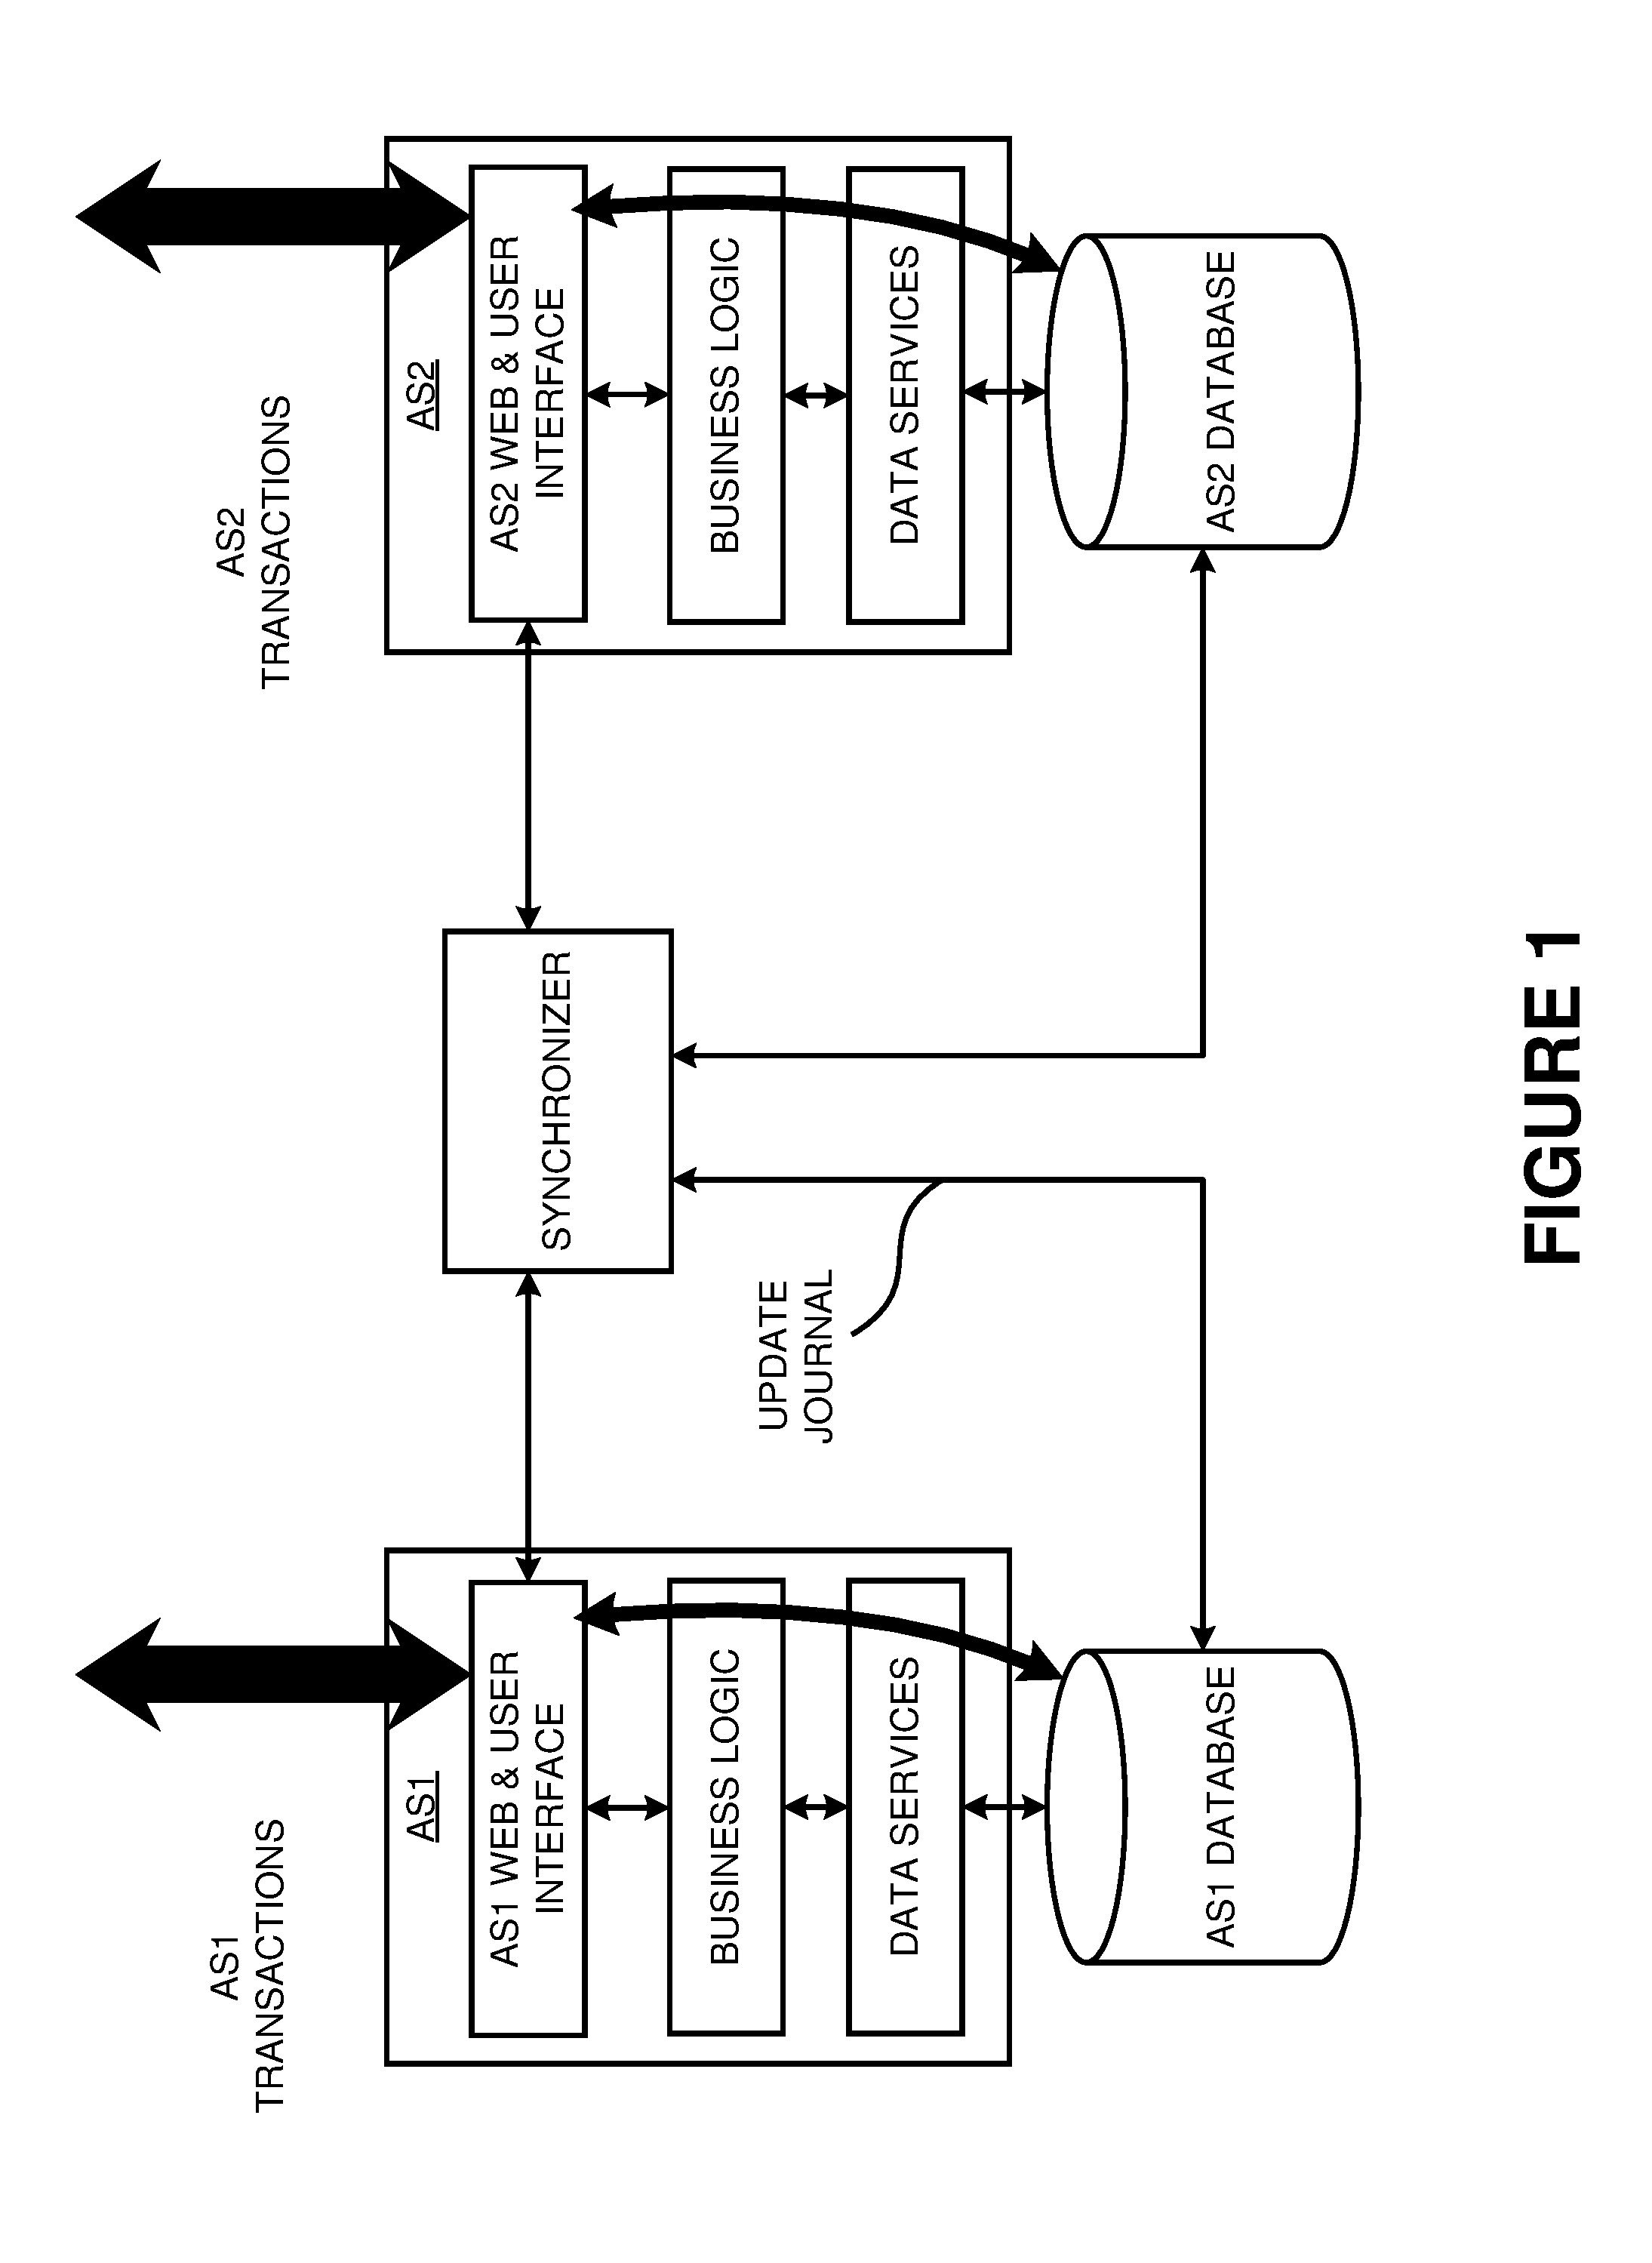 Method and system for data synchronization